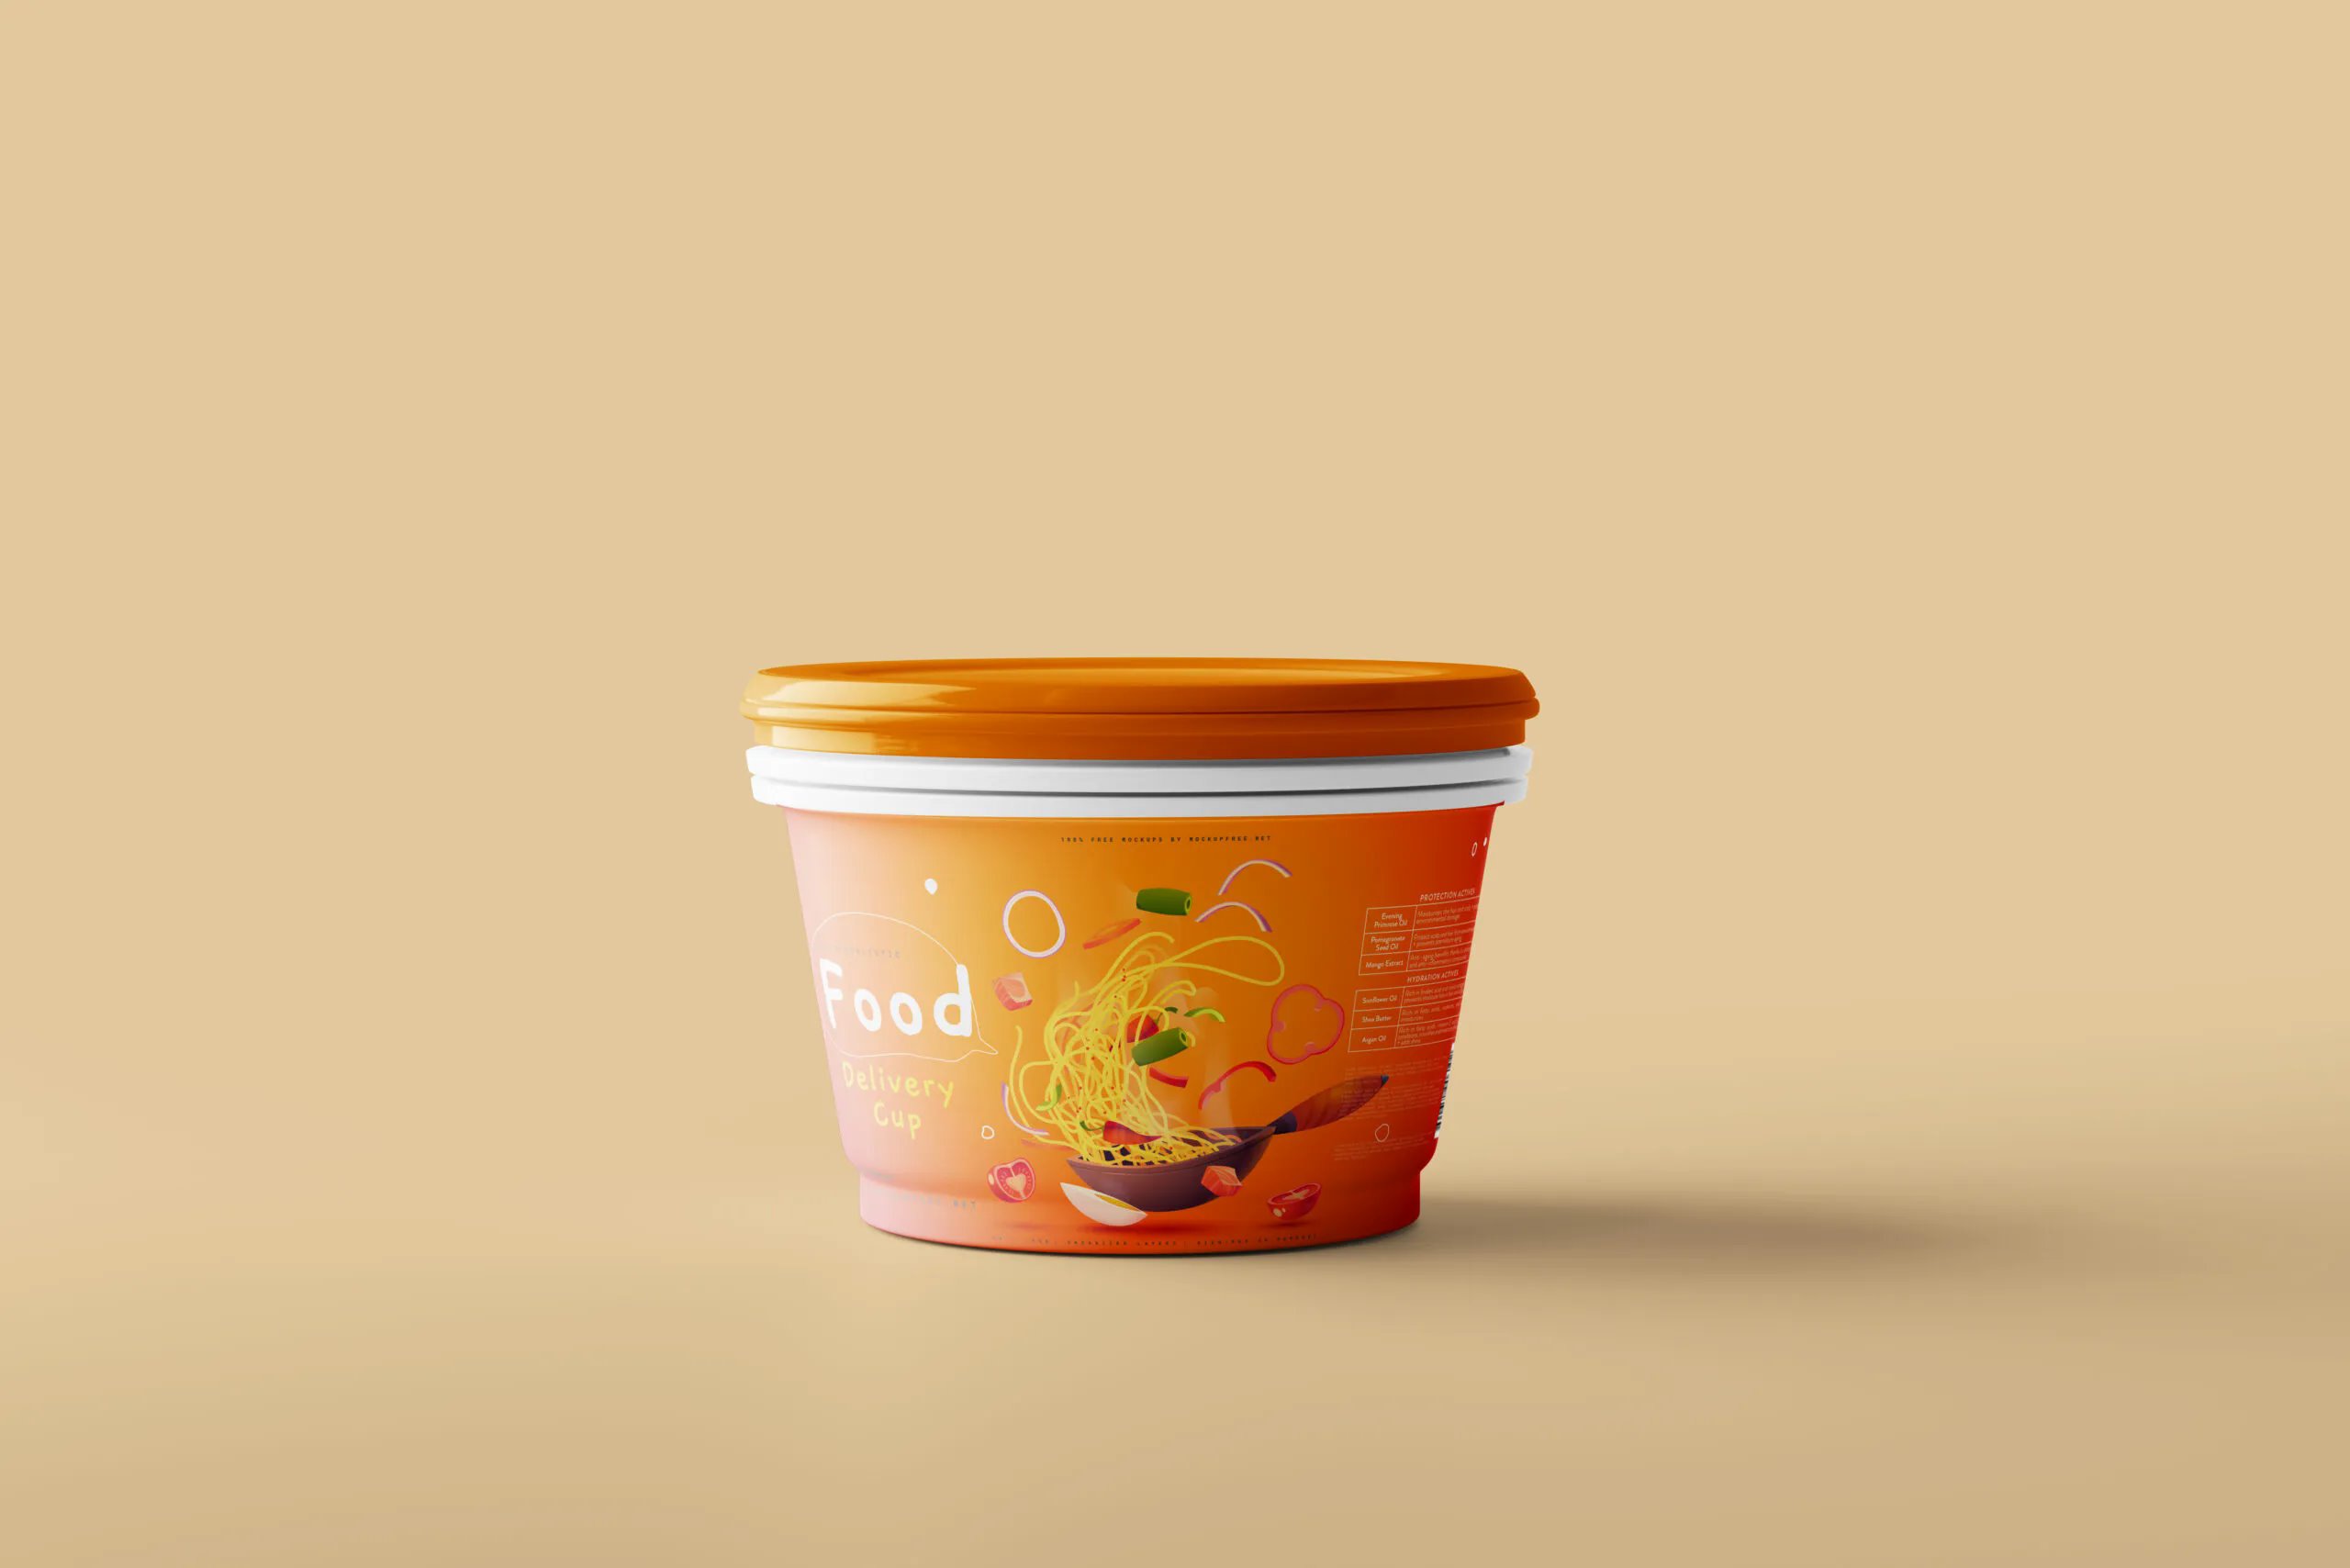 5 Food Delivery Cup Mockups in Varied Sights FREE PSD